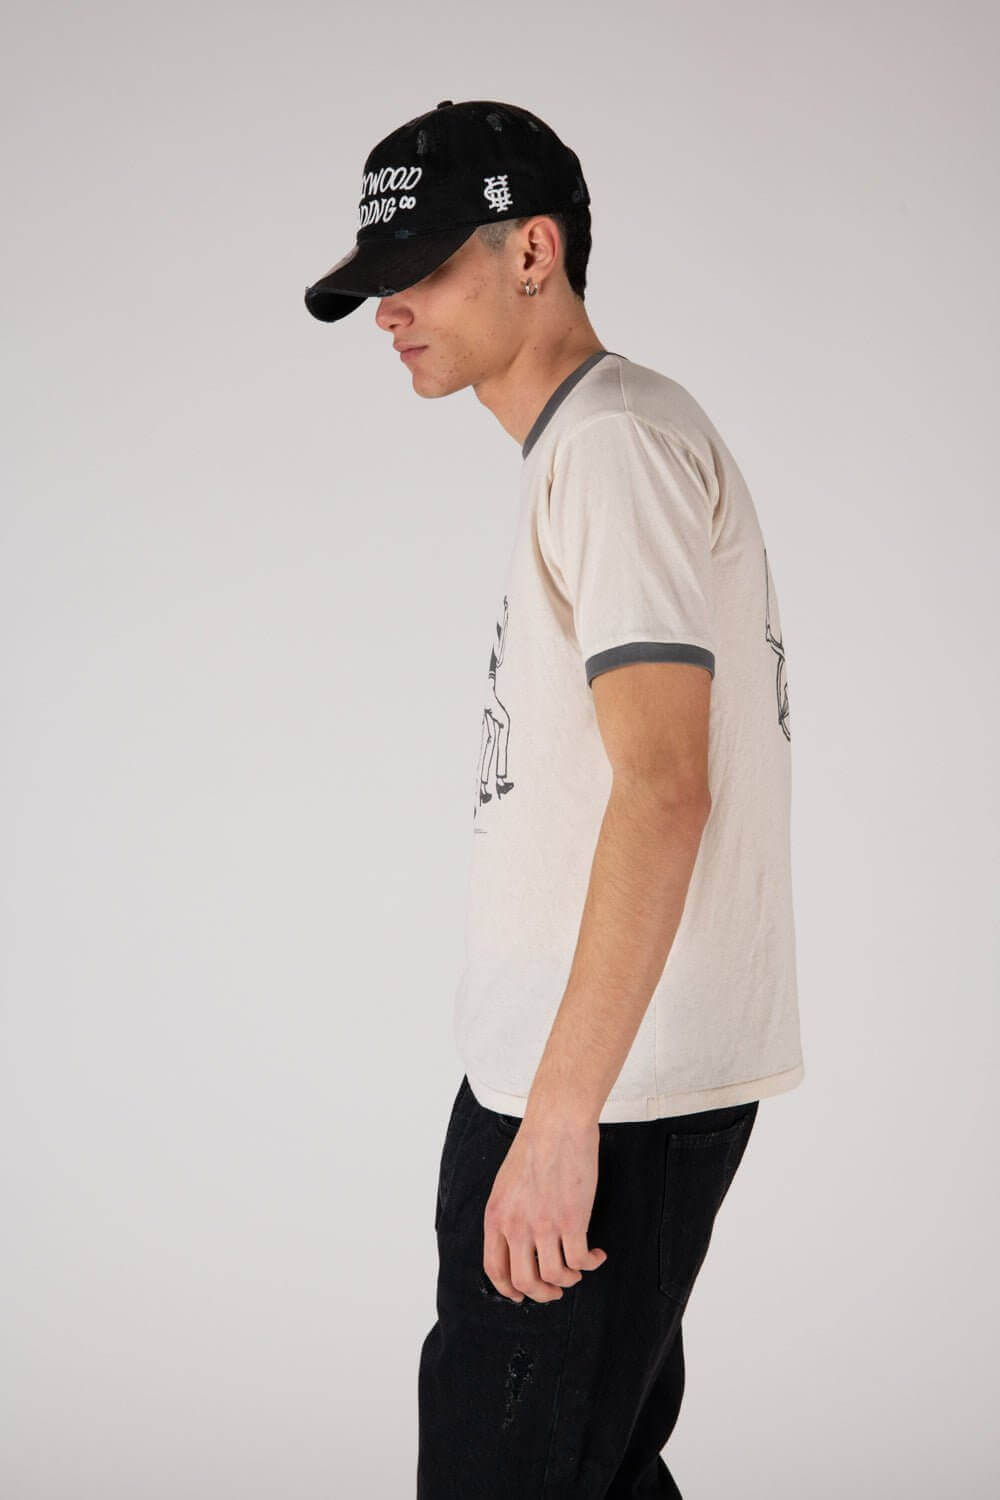 ARMLESS - SINGERS Regular fit t-shirt printed on the front. Composition: 100% Cotton HTC LOS ANGELES